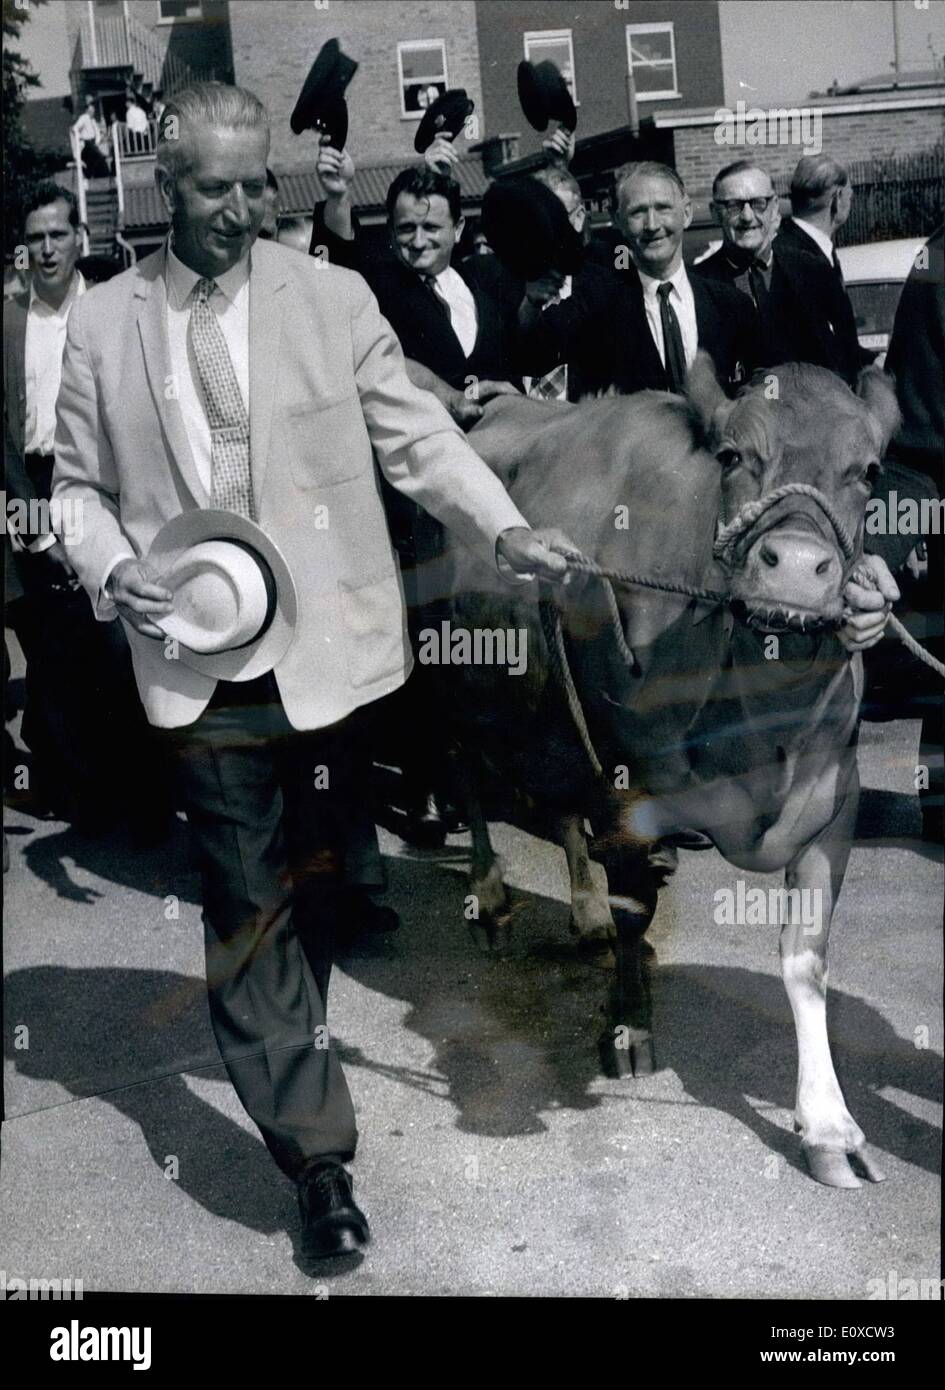 Jun. 06, 1966 - Albert's retirement gift is a Cow: Albert Short6, of St. Peter's road, Hammersmith, did not want the traditional gold watch as a retirement gift from his colleagues, after his thirty years service with the Metropolitan Water Board - and he caused rather a surprise when he asked for a Guernsey cow. Mr. Short got his cow, and the presentation was made this afternoon at the Board's offices Beaver Lane, Hammersmith. For 60 year old Mr Stock Photo